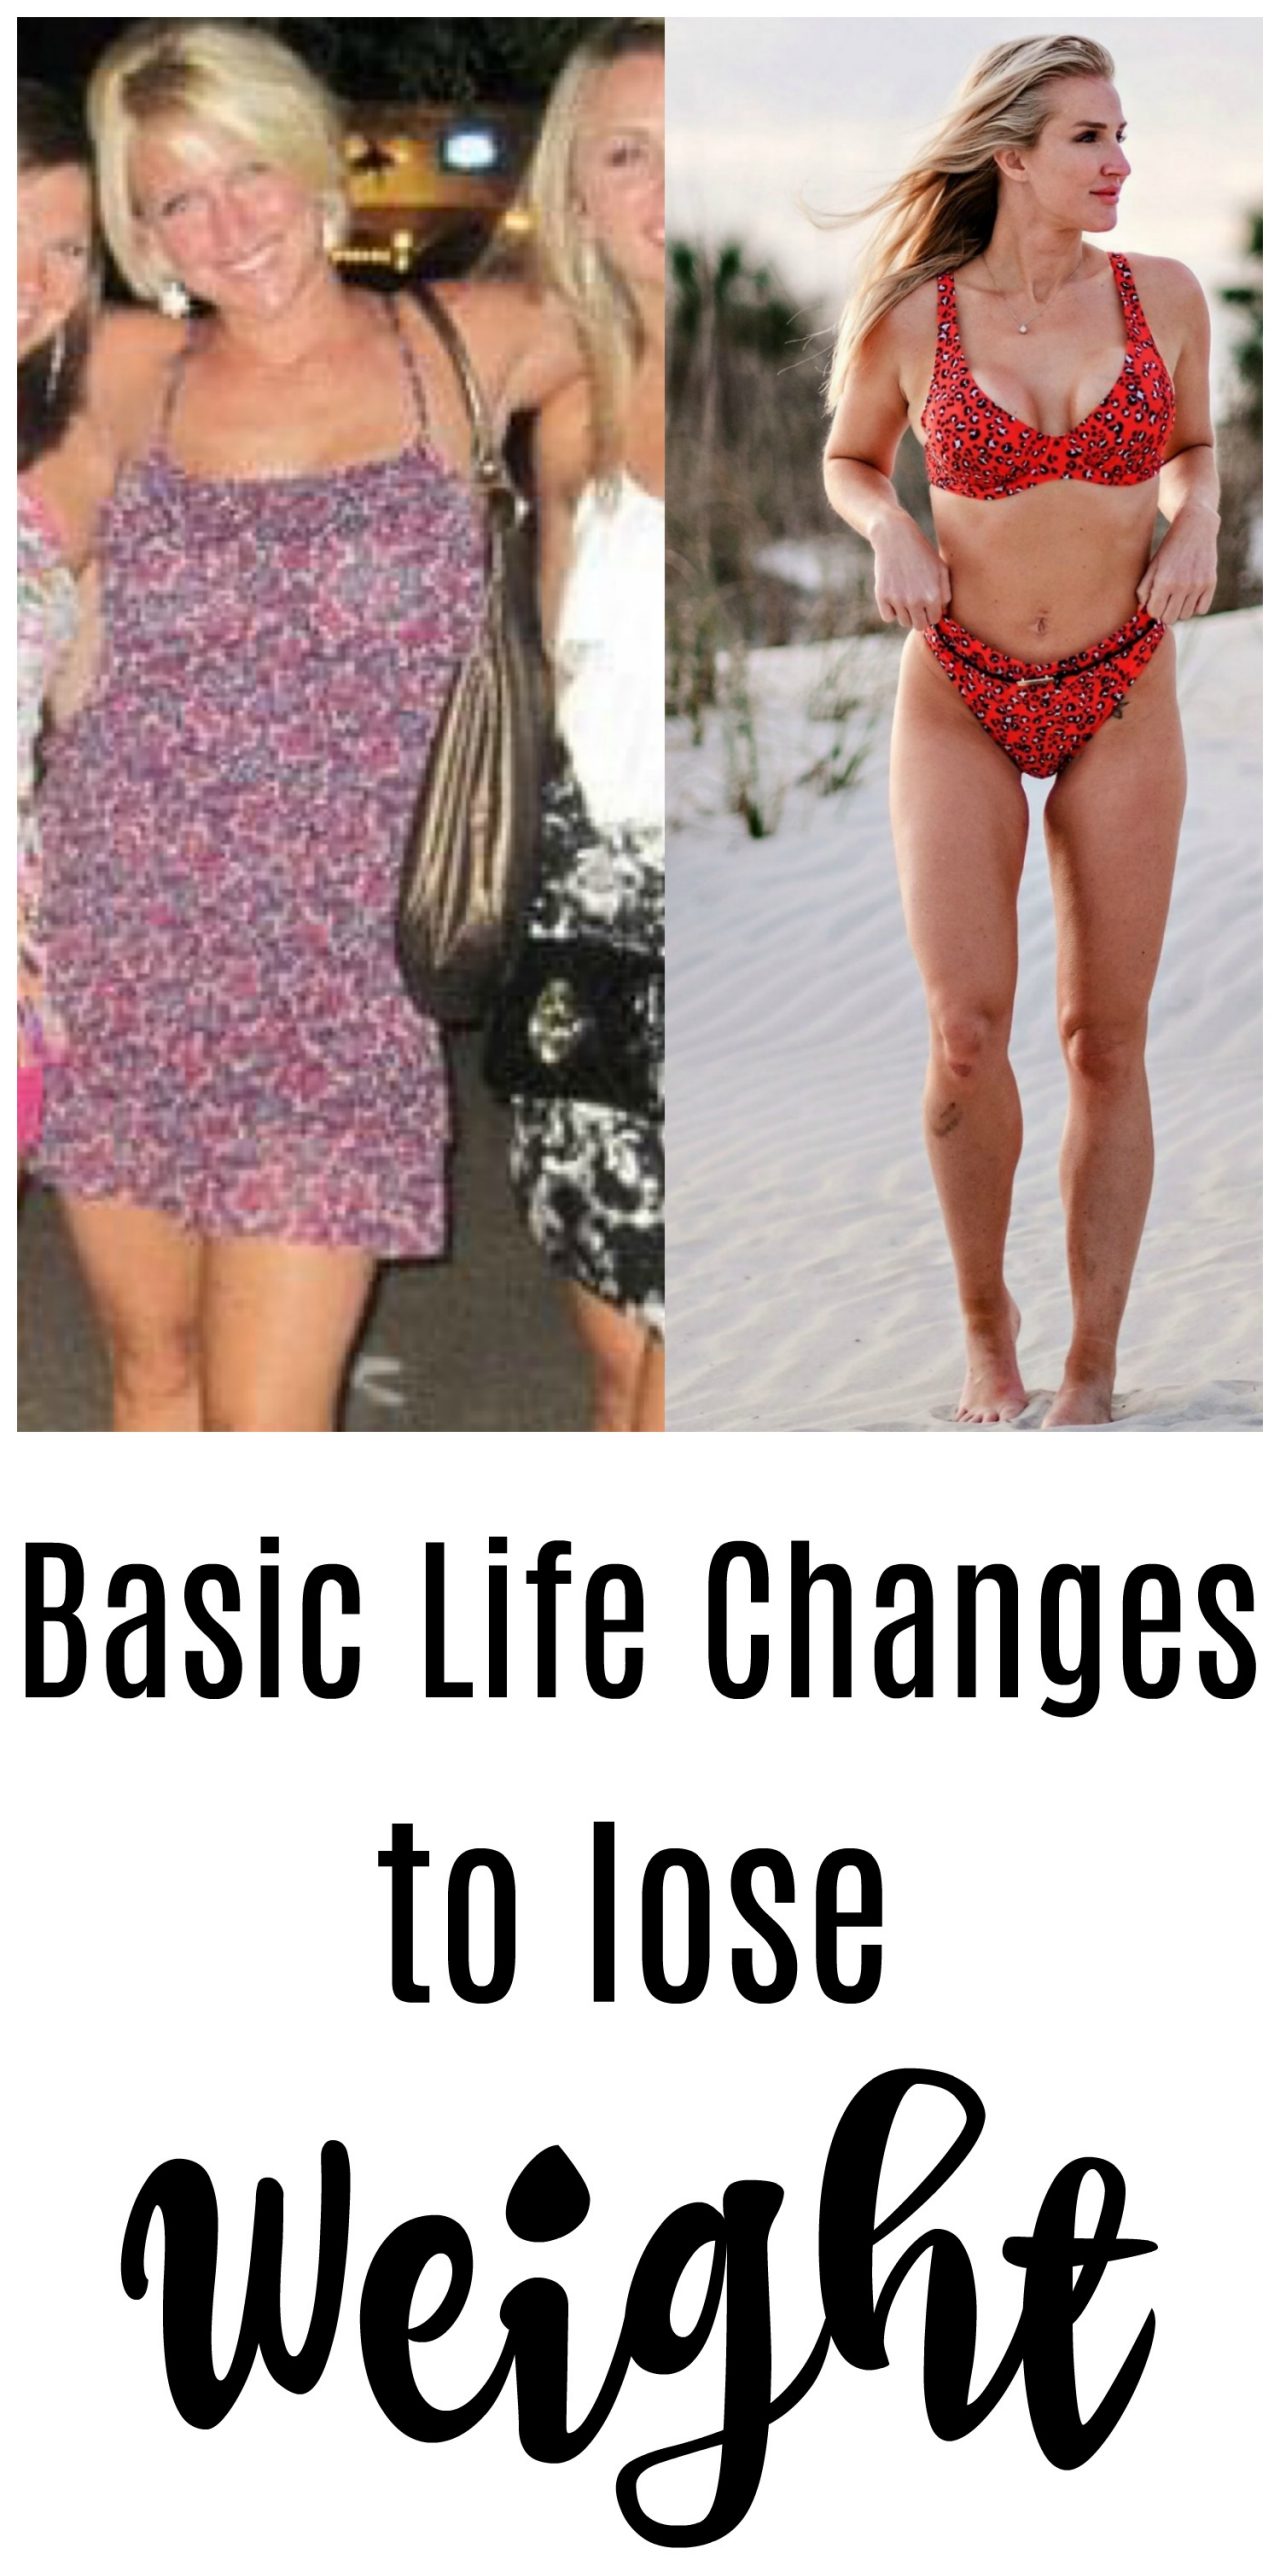 Looking to lose weight? Popular Atlanta Blogger Happily Hughes is sharing her top tips and basic life changes to lose weight HERE!